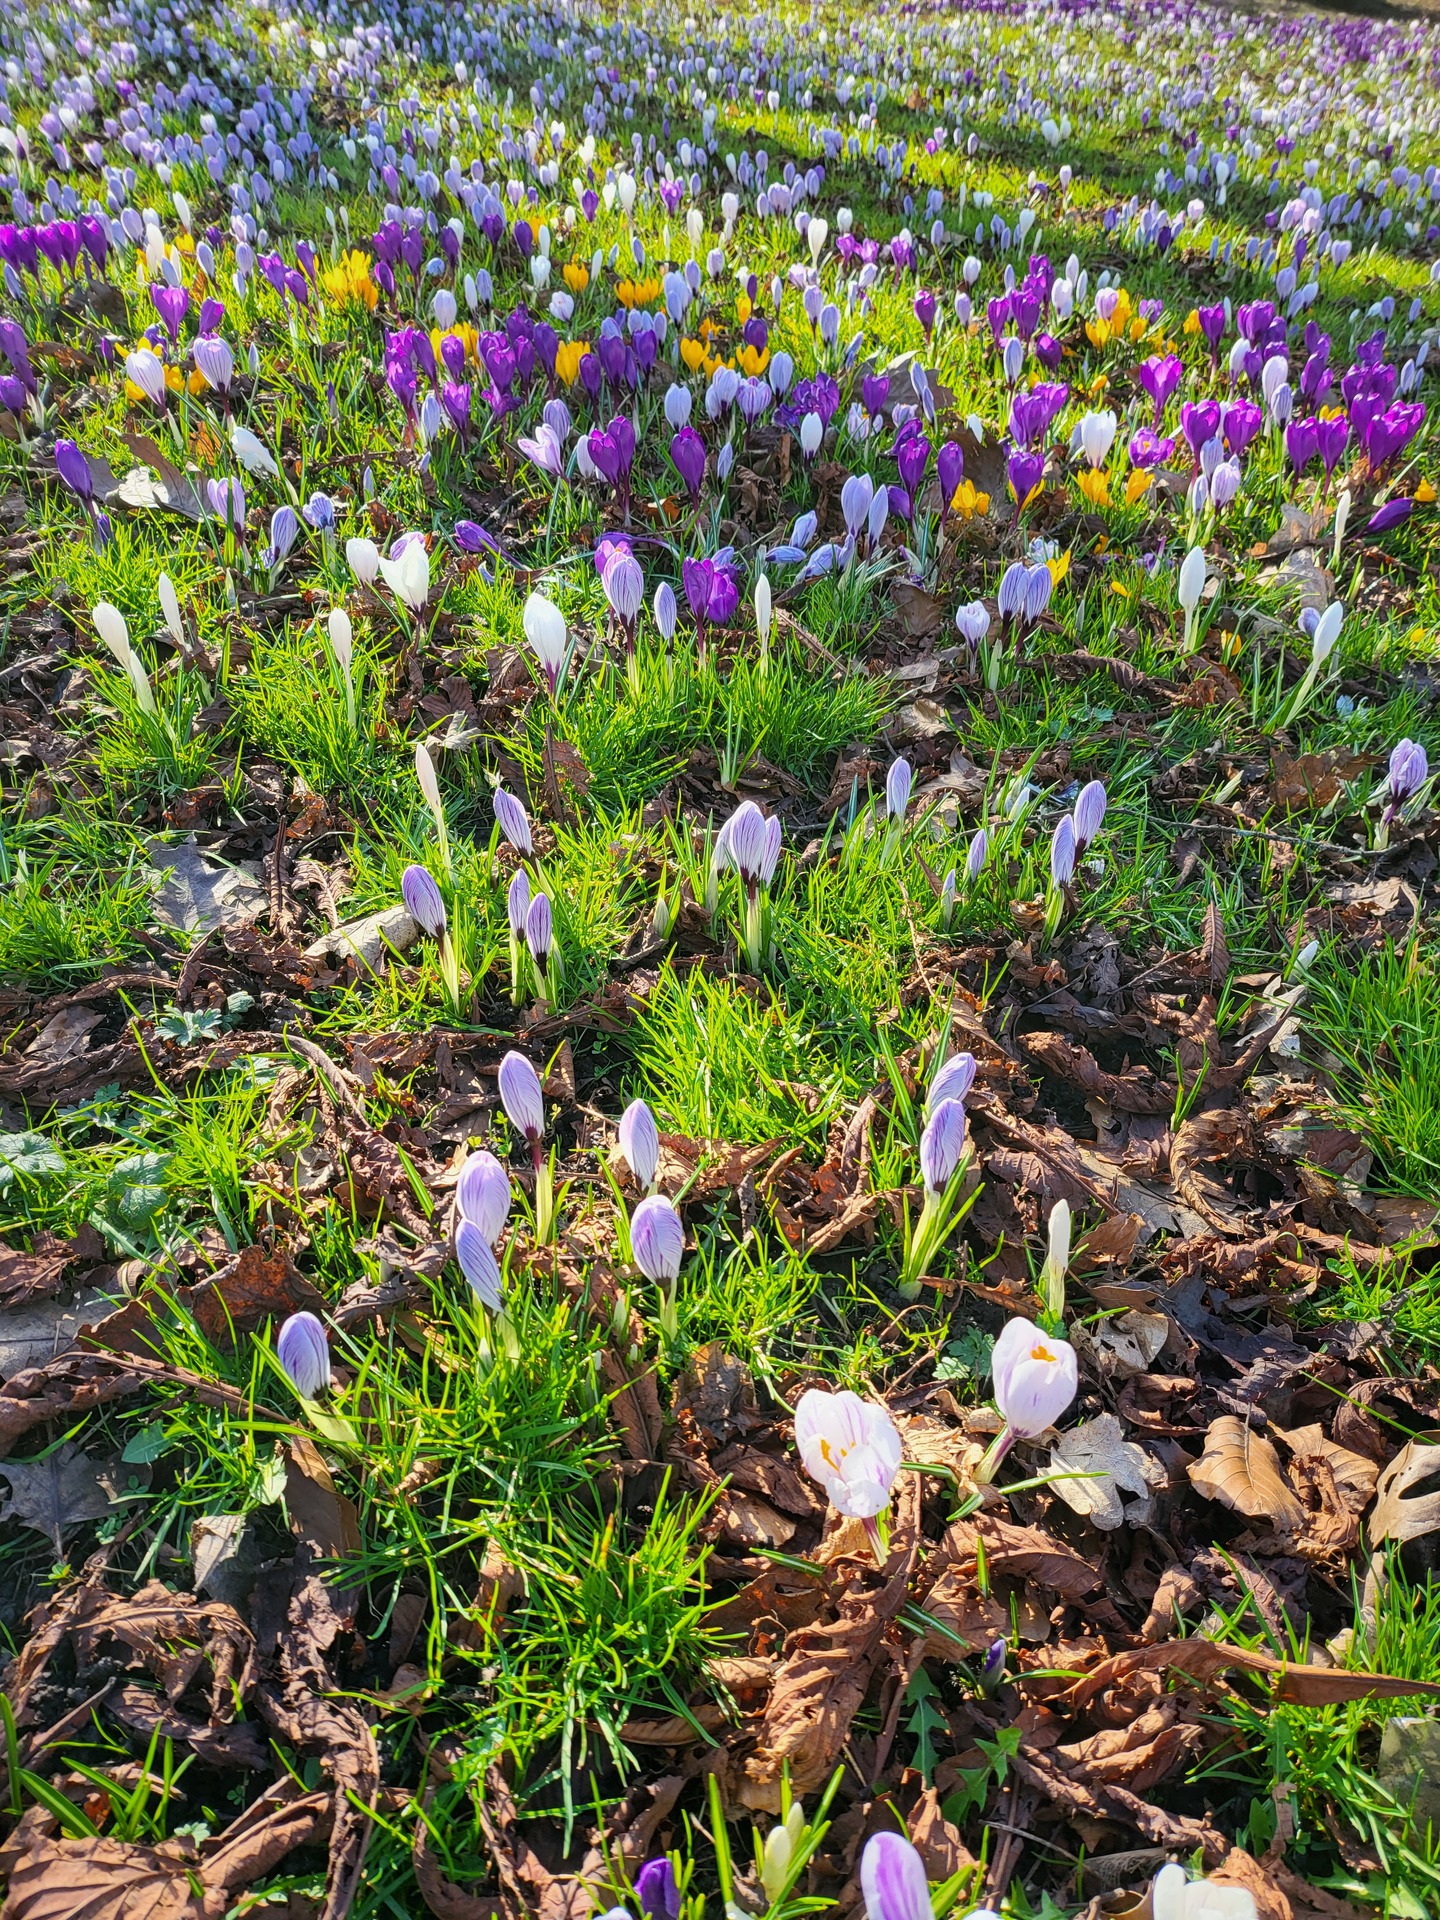 Crocus Blooming On The Stray in Harrogate - Harrogate Floral displays. The very best for Spring walks Promoting Mental Health and Mindfulness